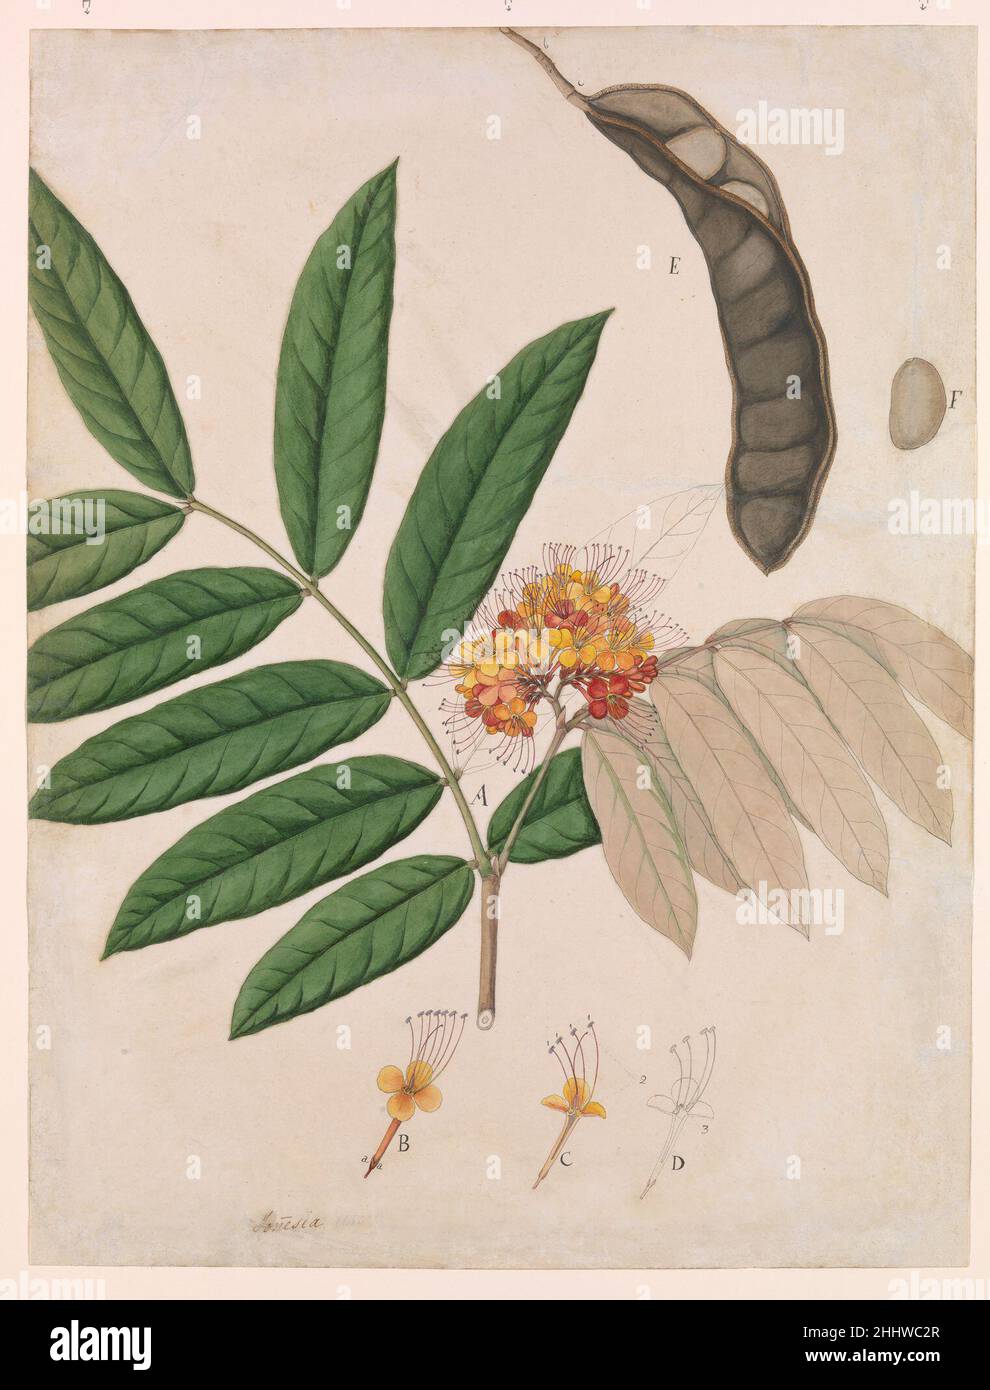 Ashoka Tree Flower, Leaves, Pod, and Seed first half 19th century At the bottom of the page, the painting is inscribed Jonesia asoca, the Latin name for the tree commonly called Ashoka. Sanskrit for 'without sorrow,' the term 'Ashoka' refers to the bark’s reputed homeopathic properties for keeping women healthy. The tree itself is a rainforest tree prized for its foliage and fragrant flowers, which are carefully depicted here. As in the manner of scientific drawings, the branch is centered on the page, which has no background elements, and the pod and one of its seeds are shown in the top righ Stock Photo